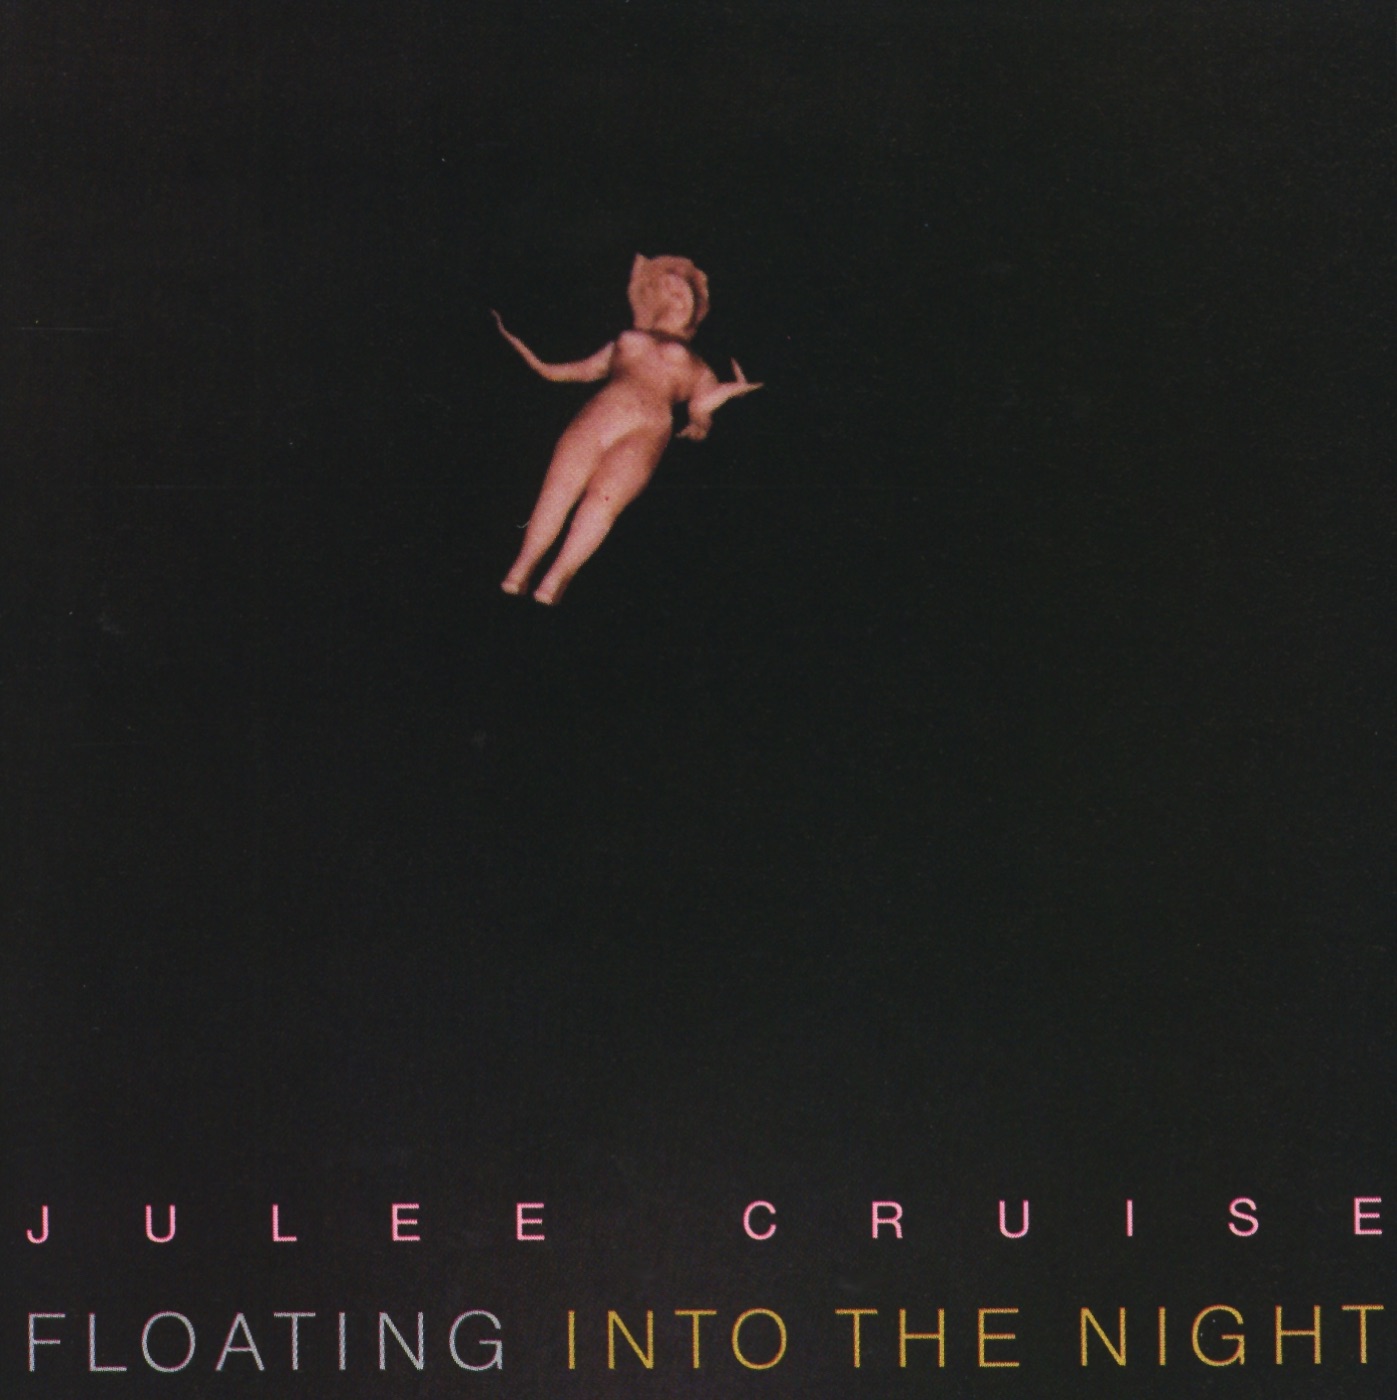 Floating Into the Night by Julee Cruise